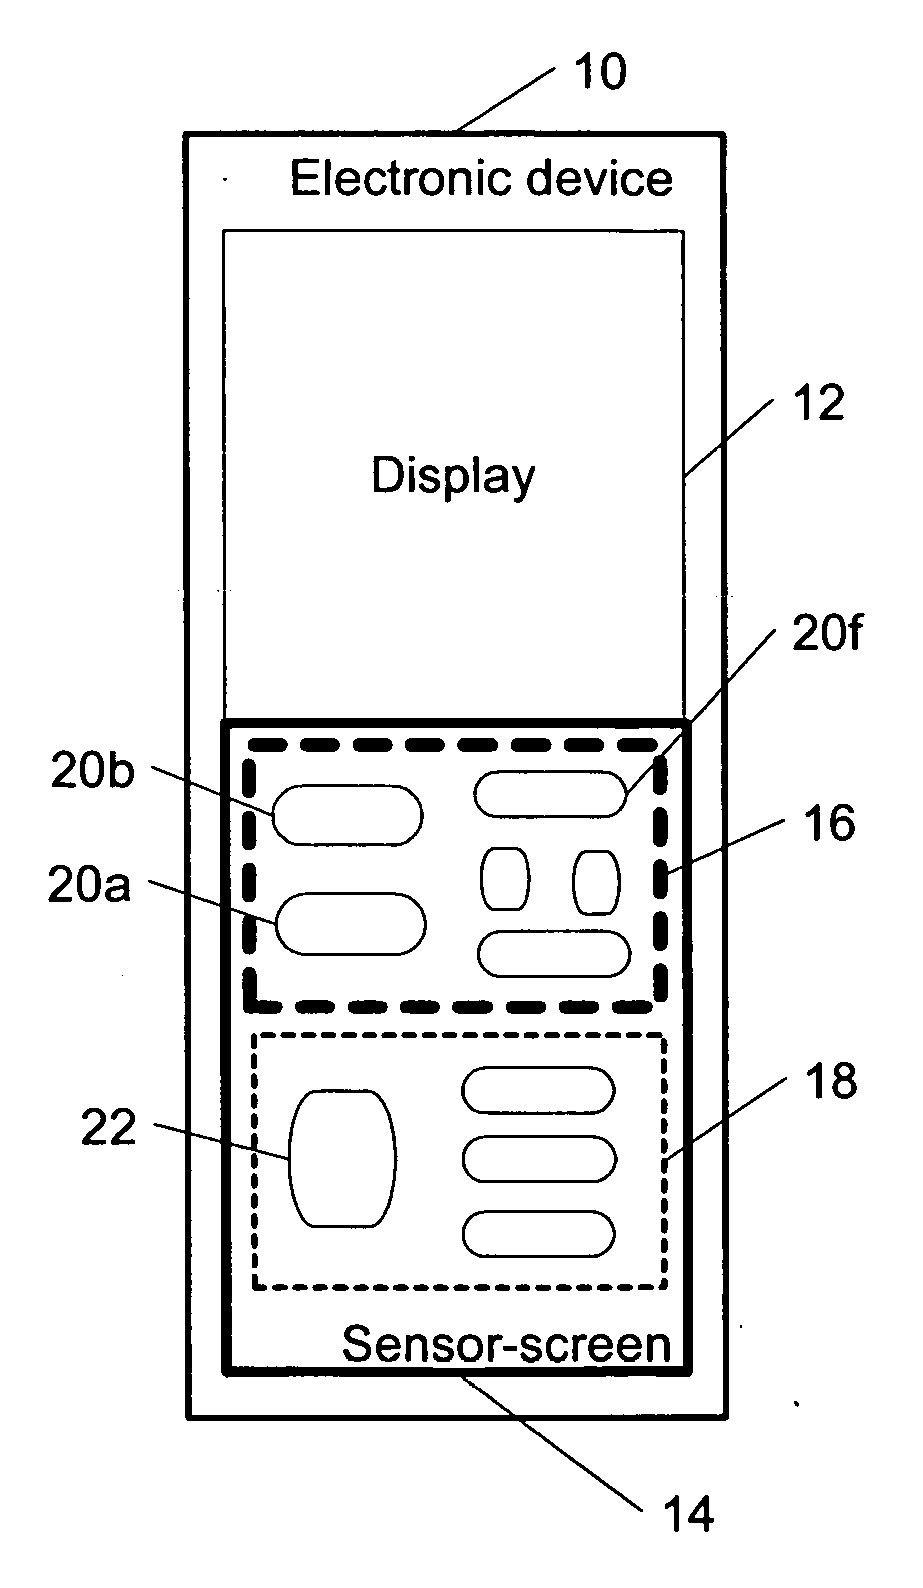 Changing keys drawn on a display and actuating them using a sensor-screen